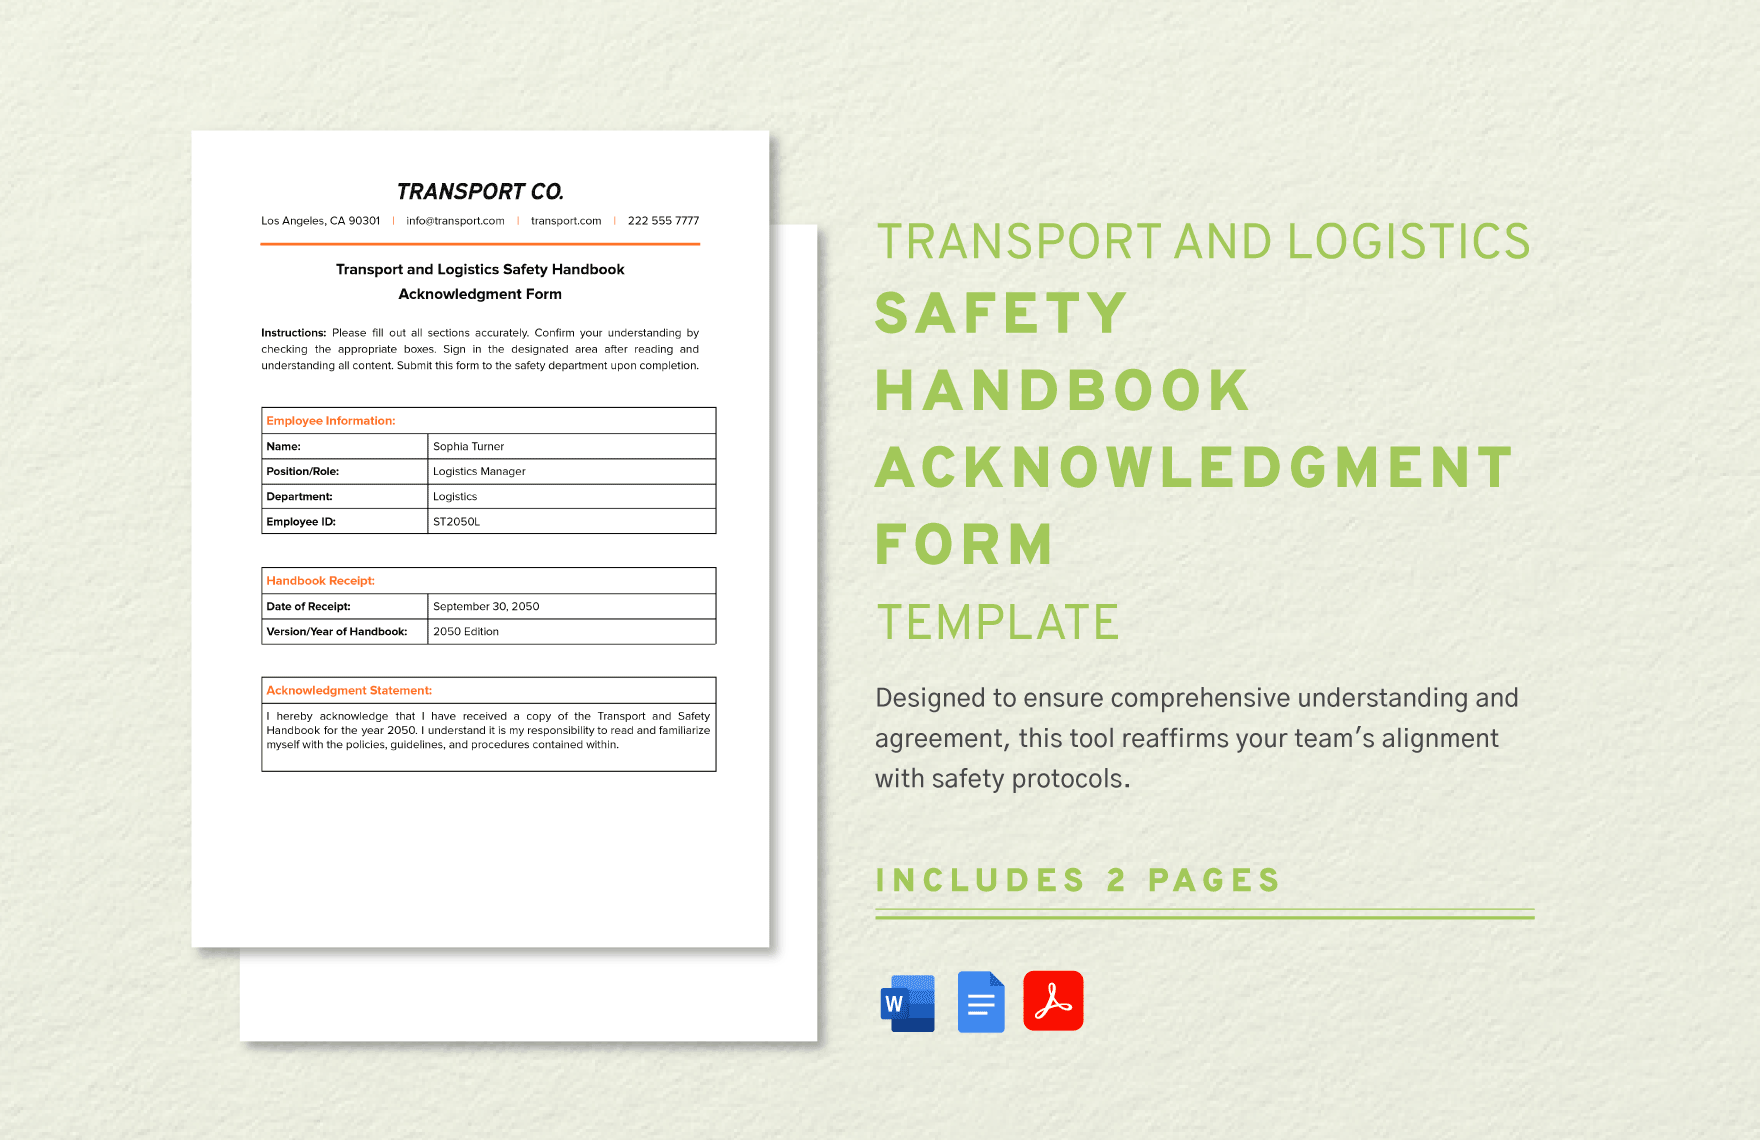 Transport and Logistics Safety Handbook Acknowledgment Form Template